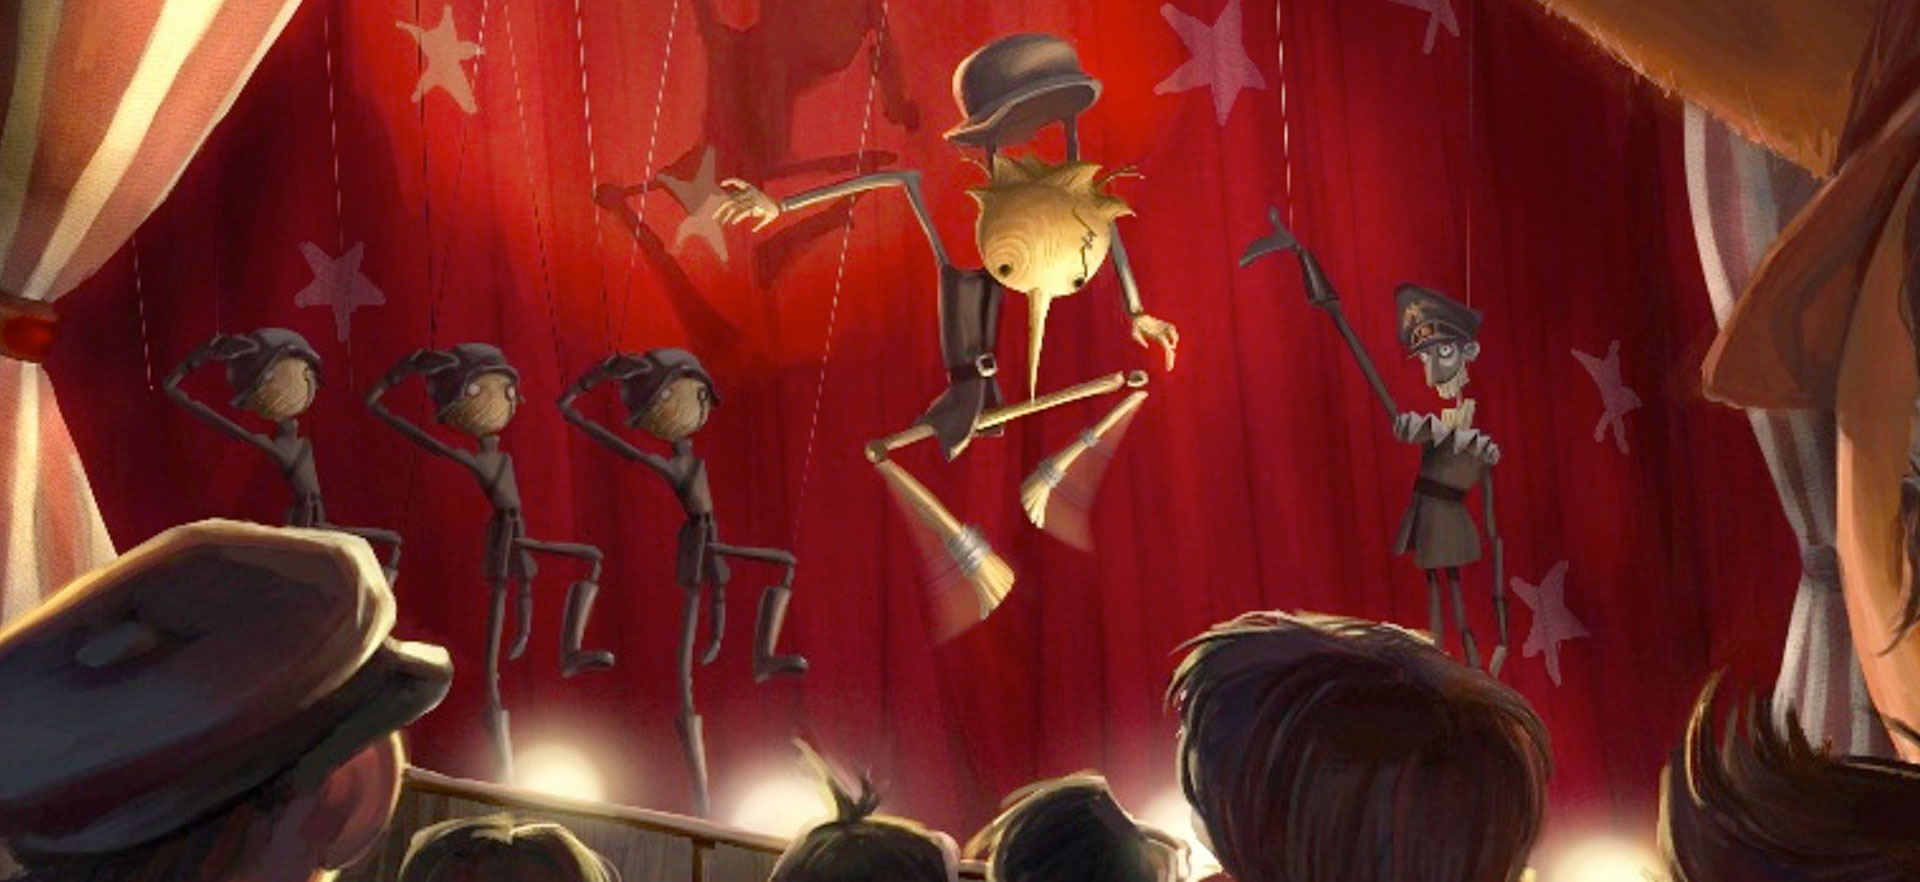 Guillermo del Toro's Pinocchio Shares Themes with Frankenstein /Film